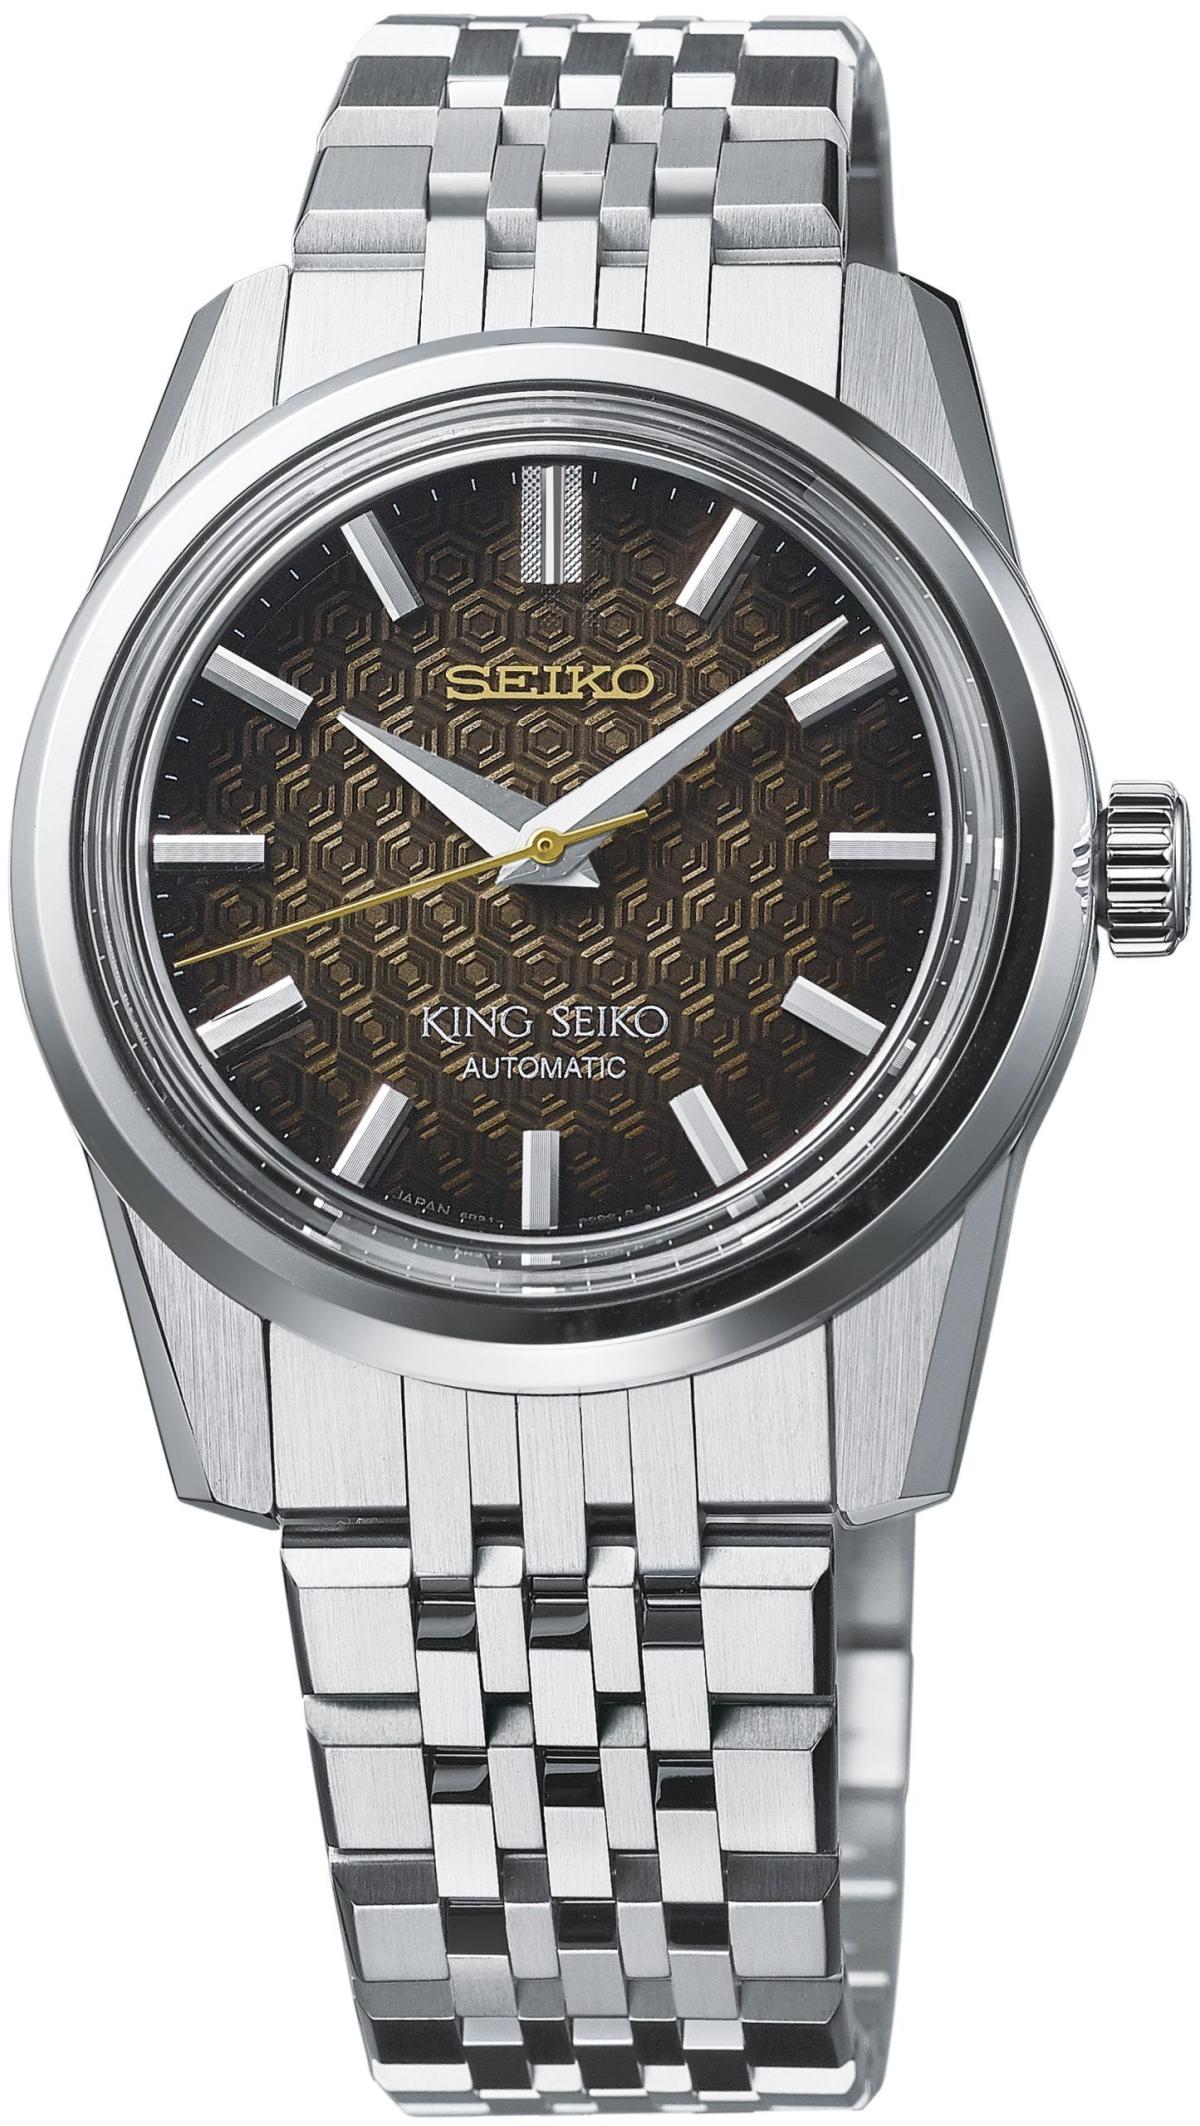 New King Seiko series and Prospex's first GMT completes the brand for 2023